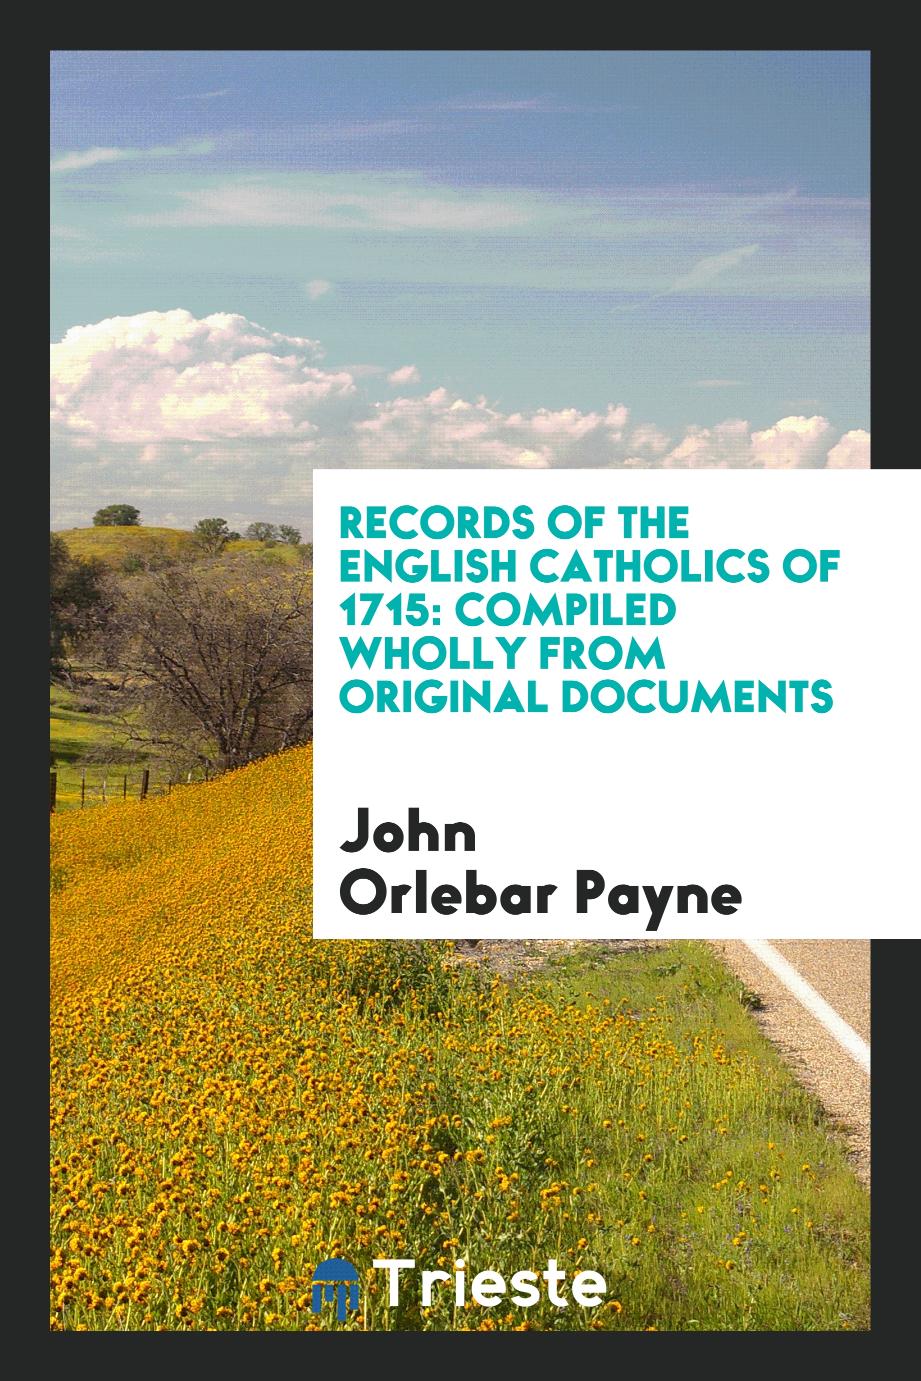 Records of the English Catholics of 1715: Compiled Wholly from Original Documents